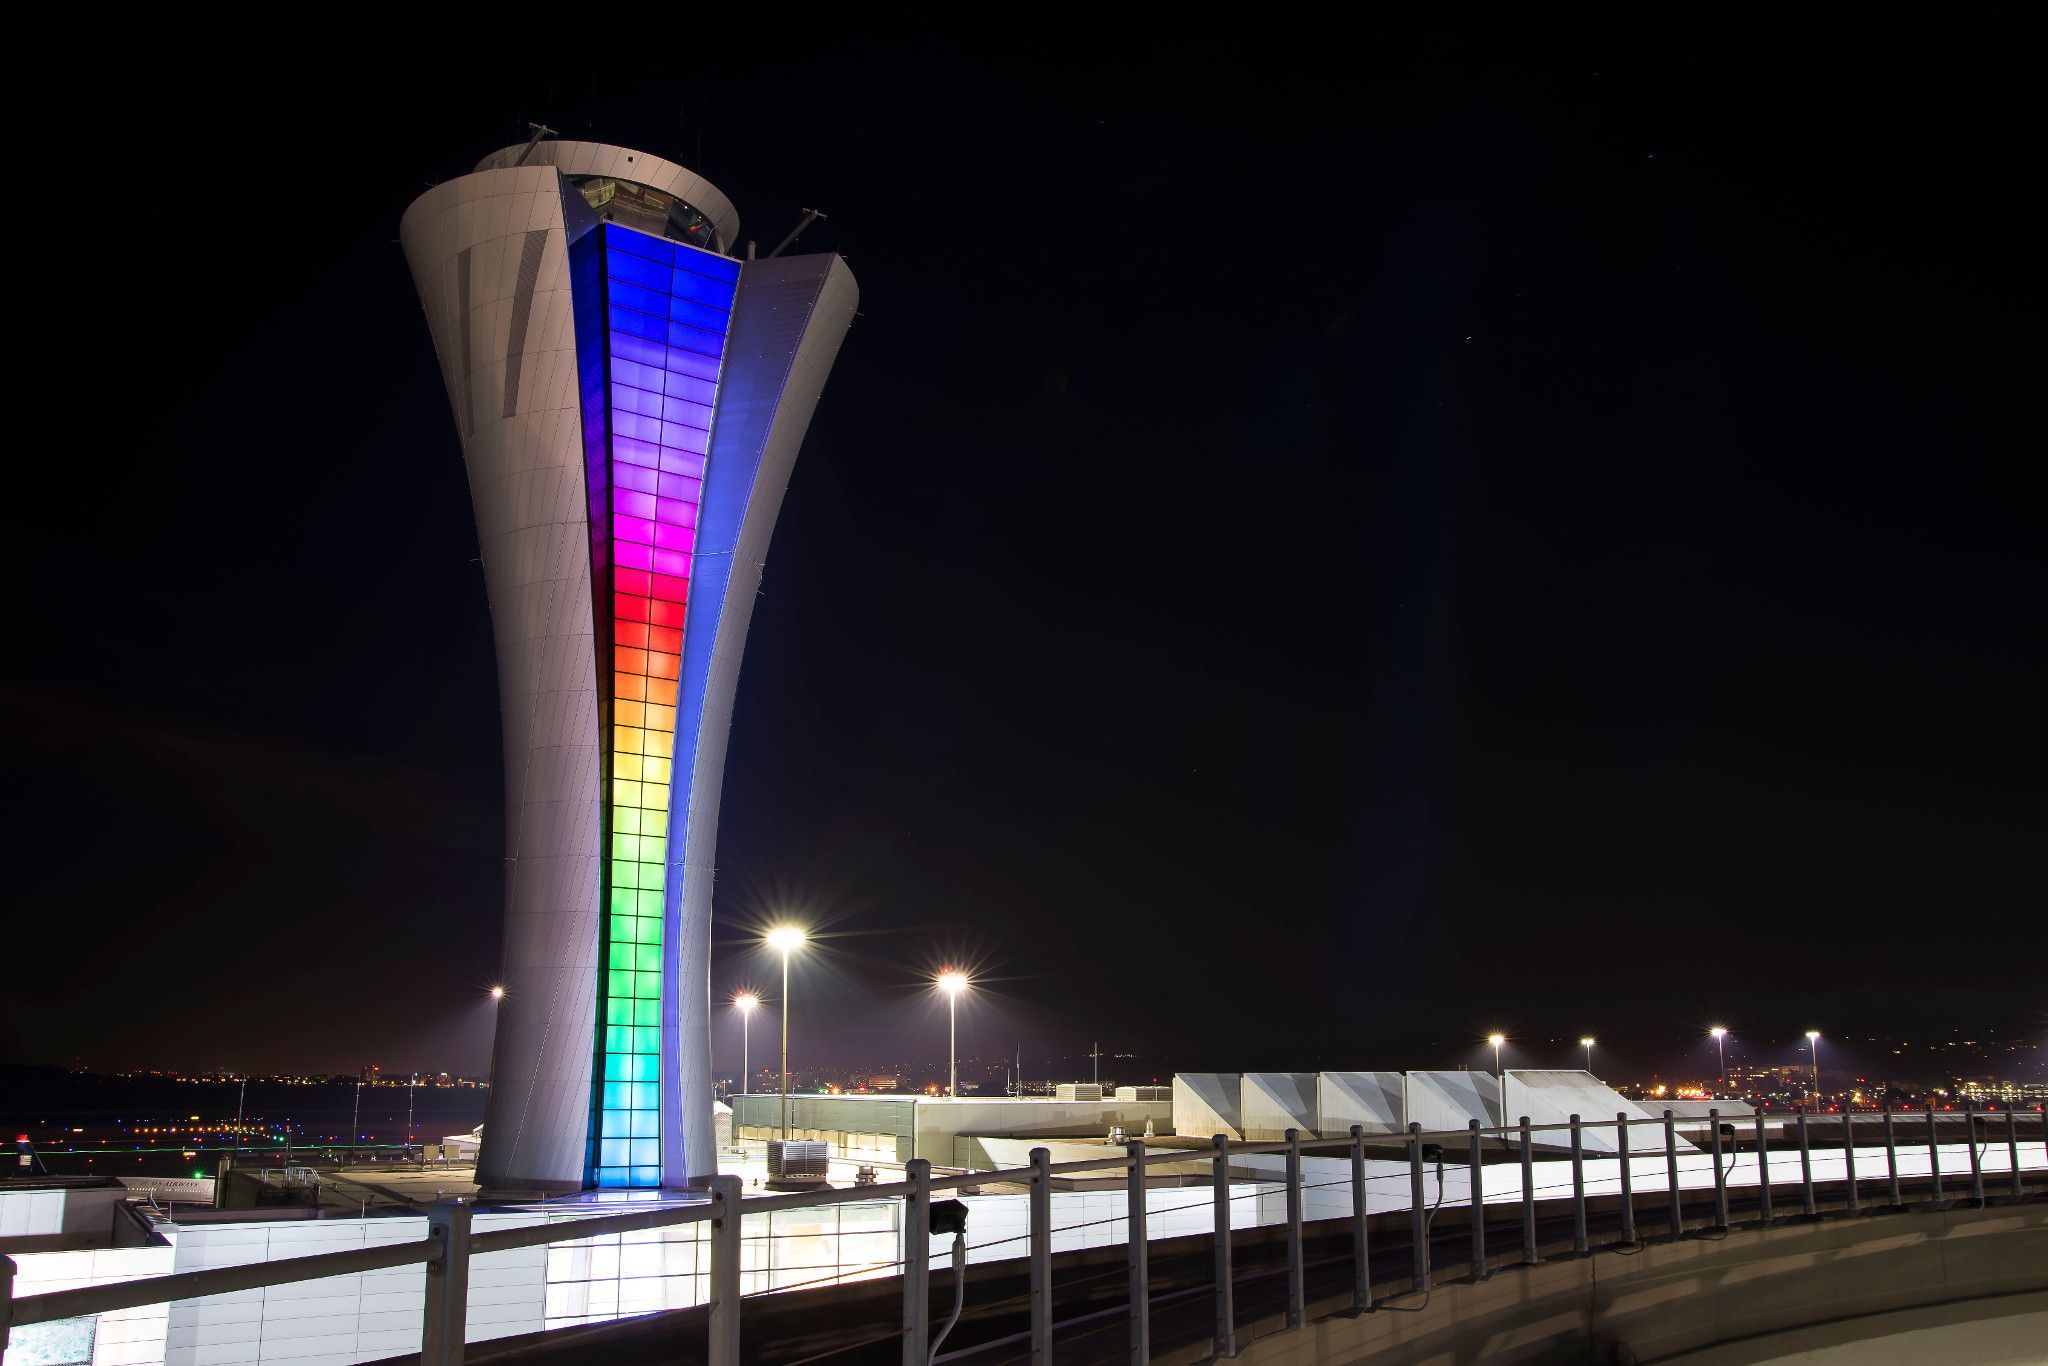 SFO air traffic control tower lit up at night for Pride month